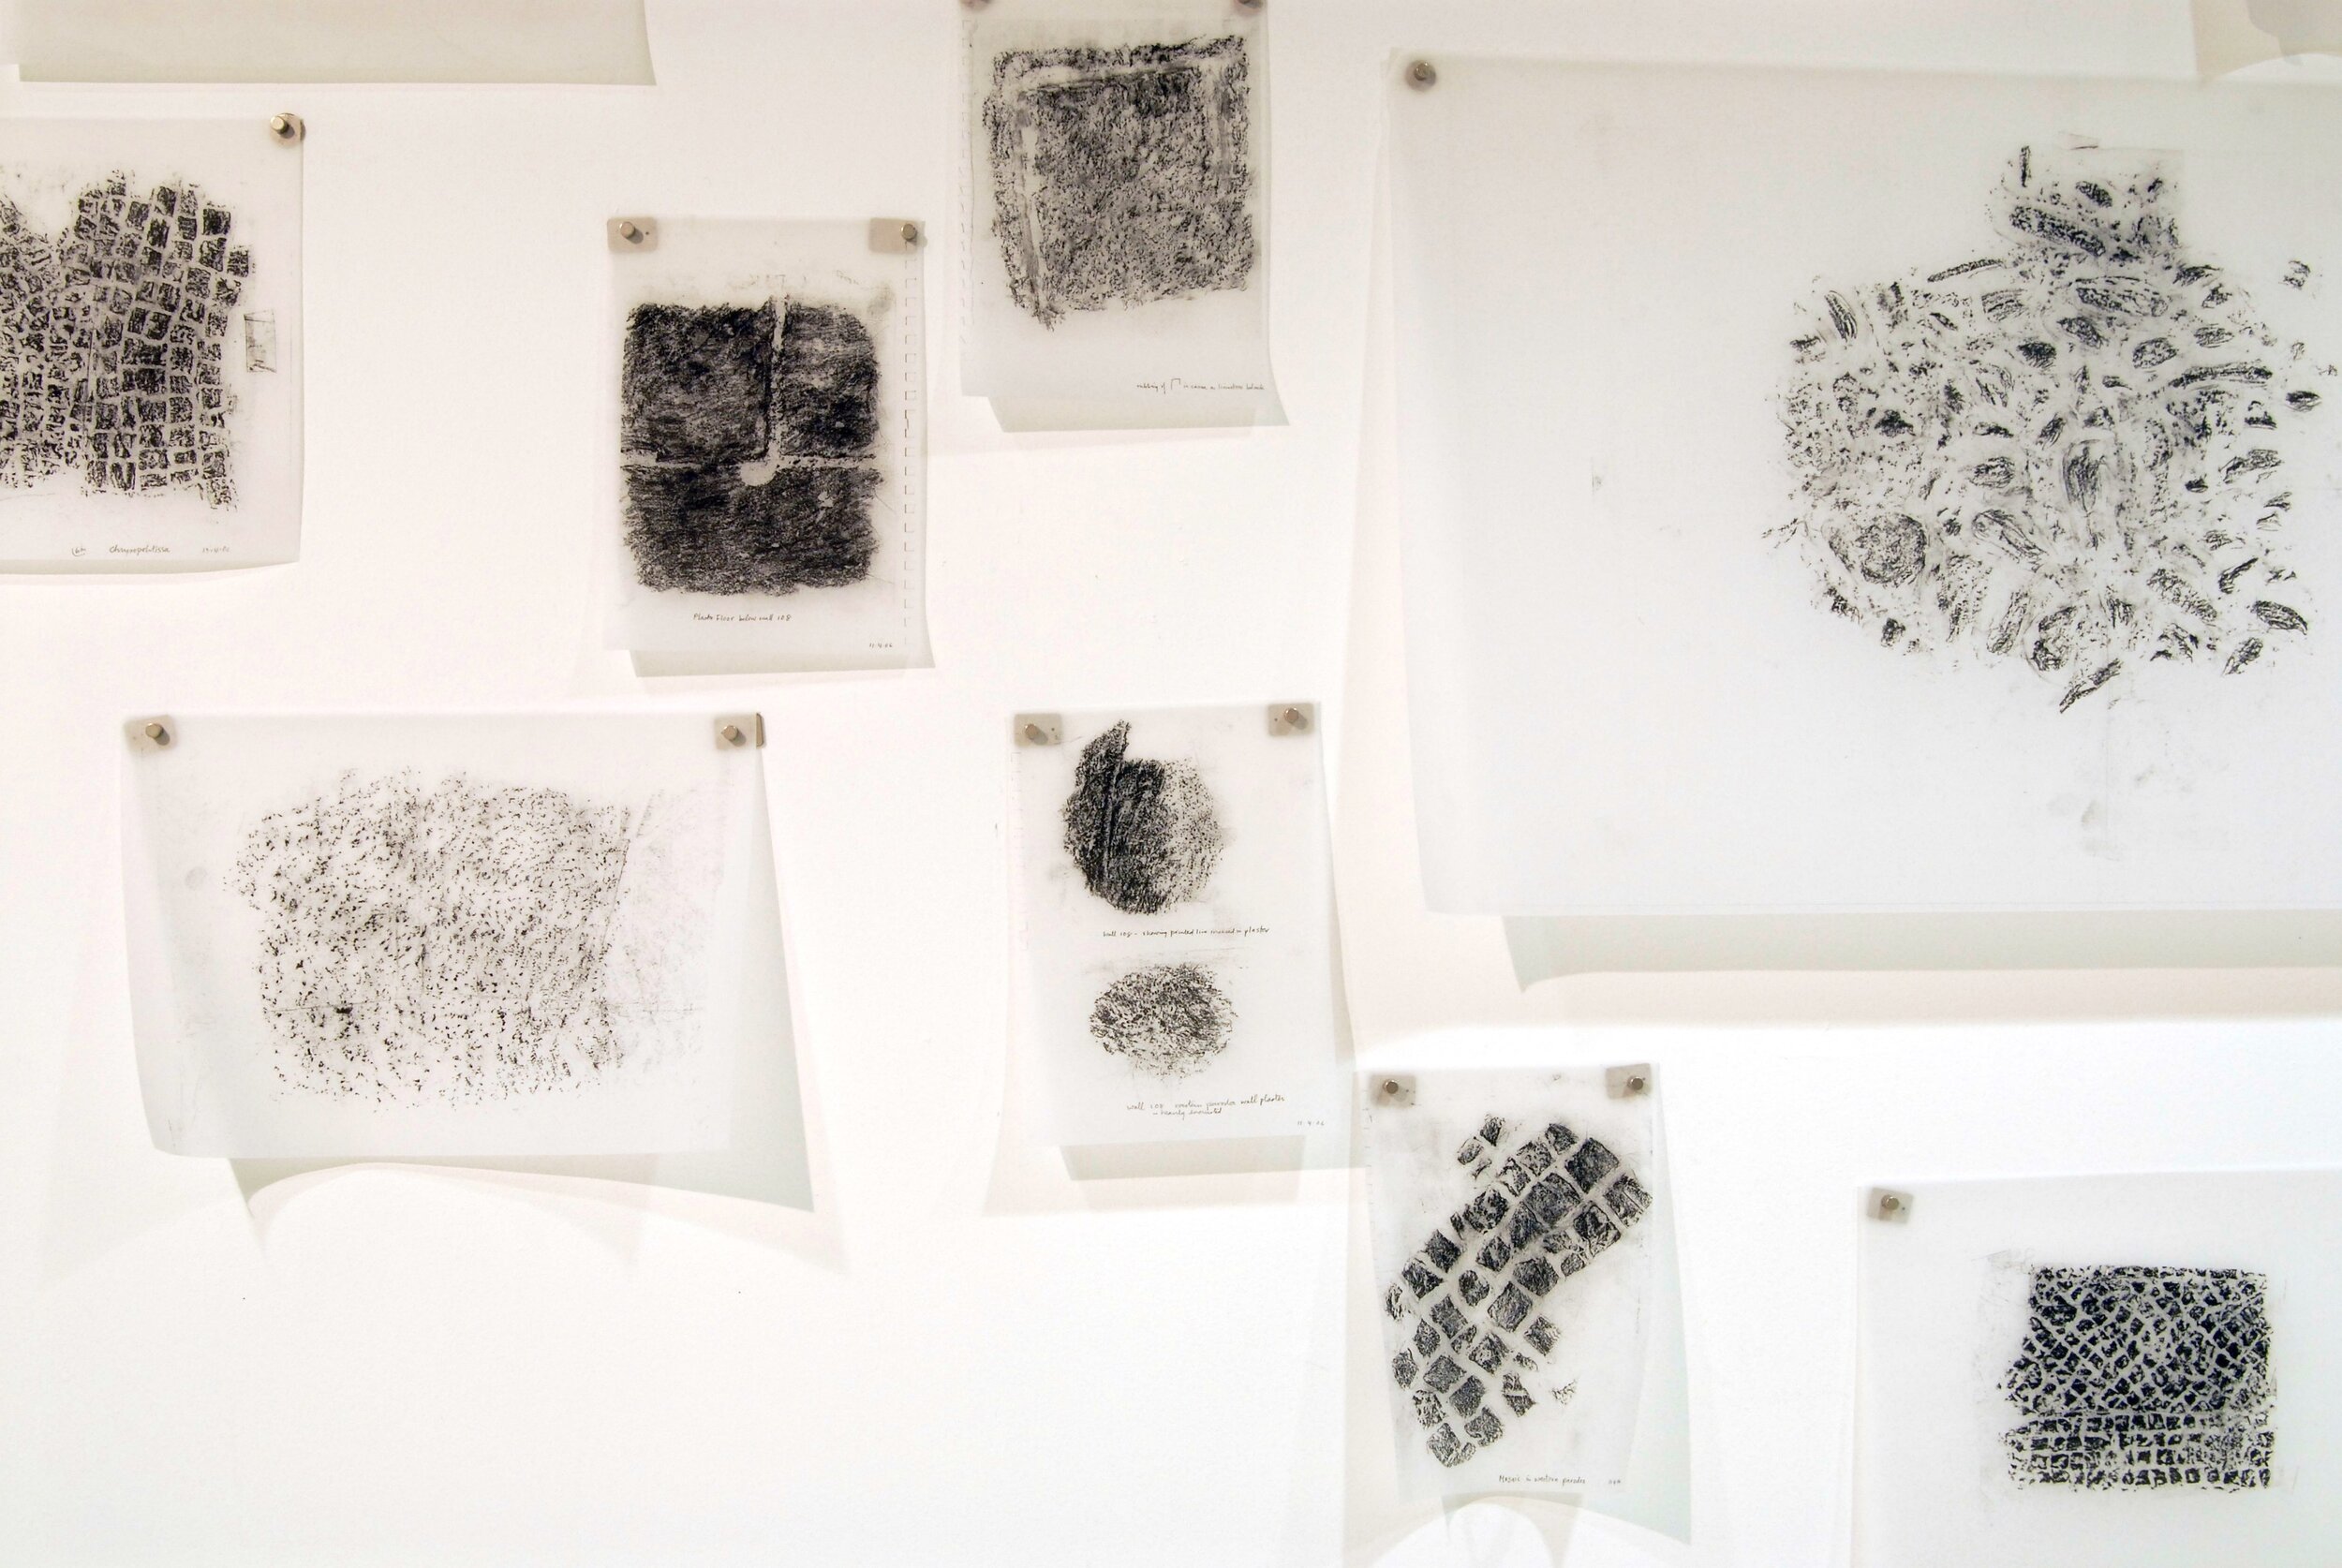  Rubbings taken from surfaces of the Paphos theatre, by Diana Wood Conroy. Photo: Courtesy of the artist. 